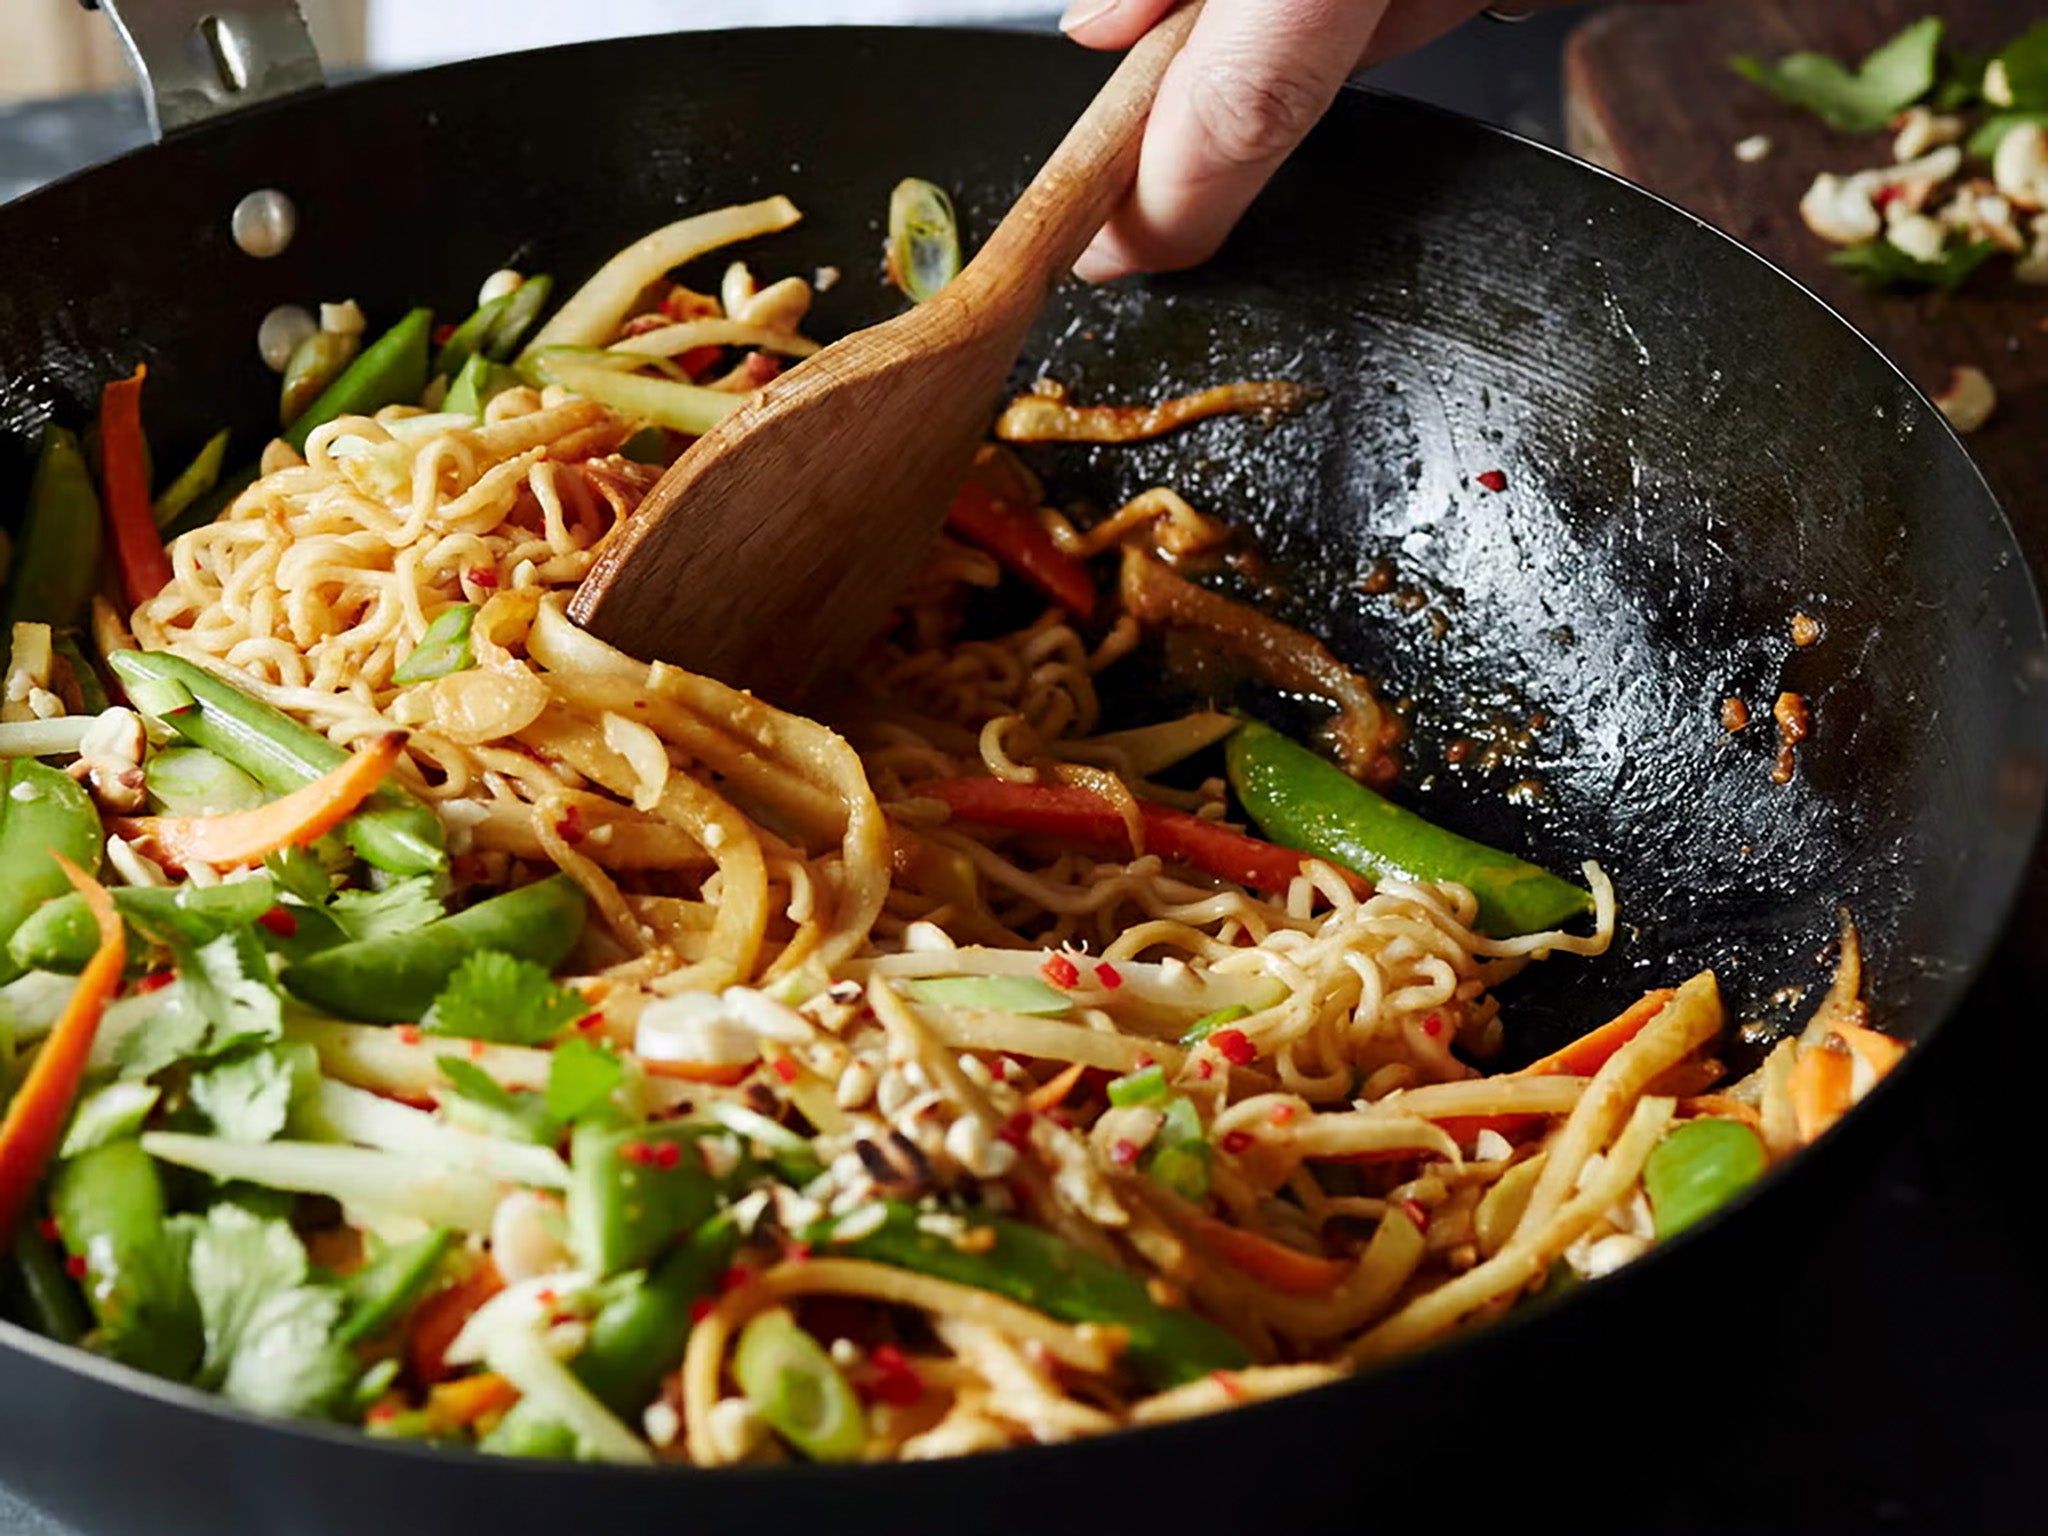 Kohlrabi absorbs all the spicy deliciousness in this stir-fry